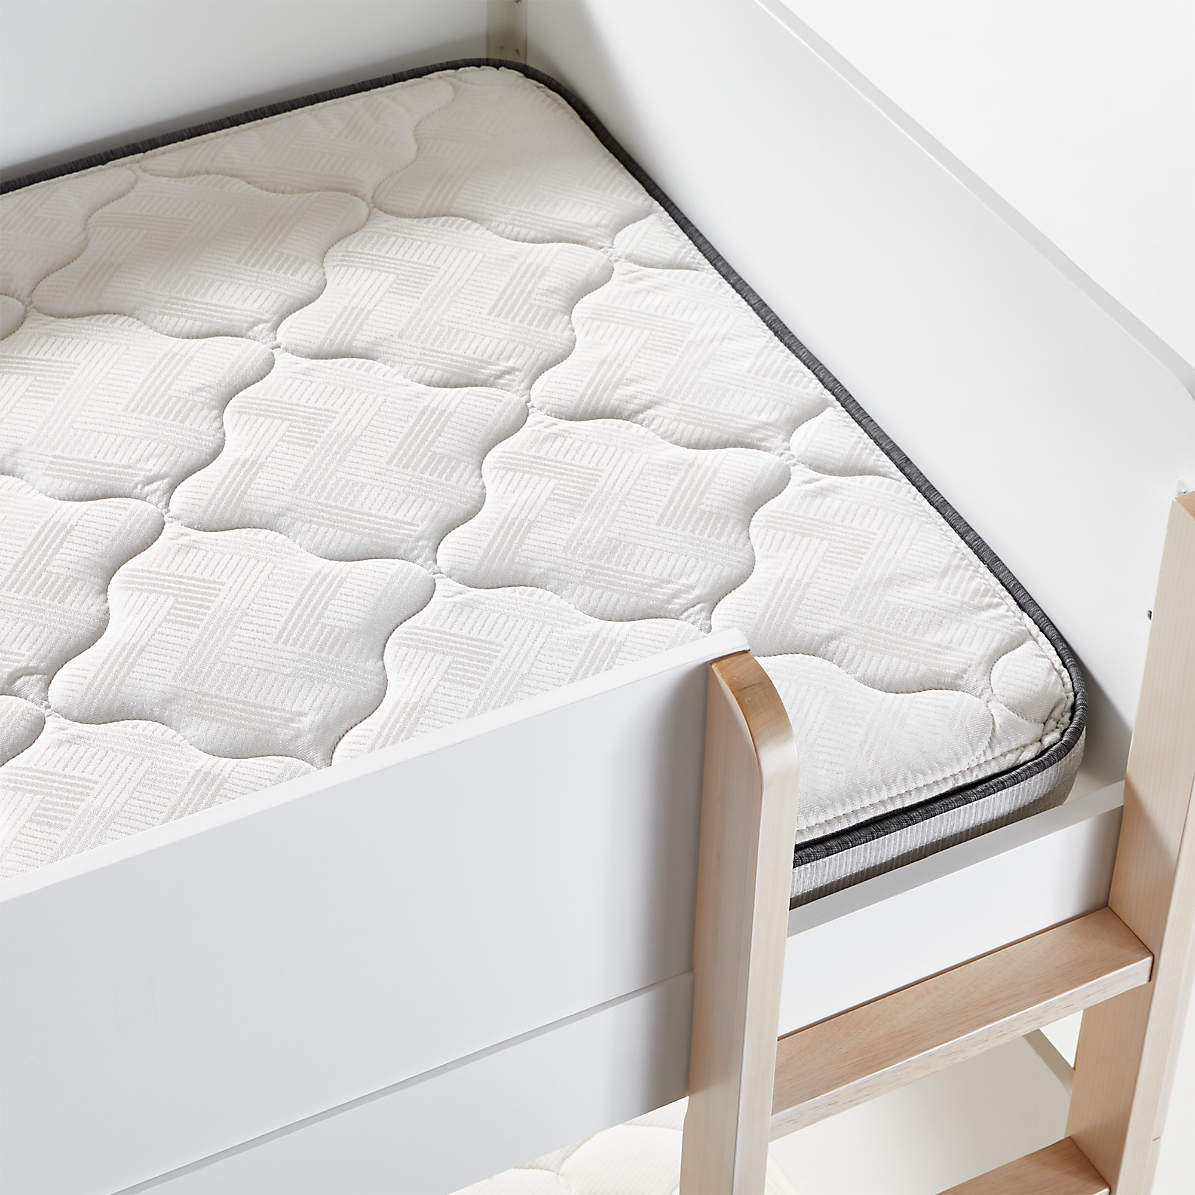 Simmons Beautyrest Foam Twin Bunk, Bunk Beds Sold With Mattresses